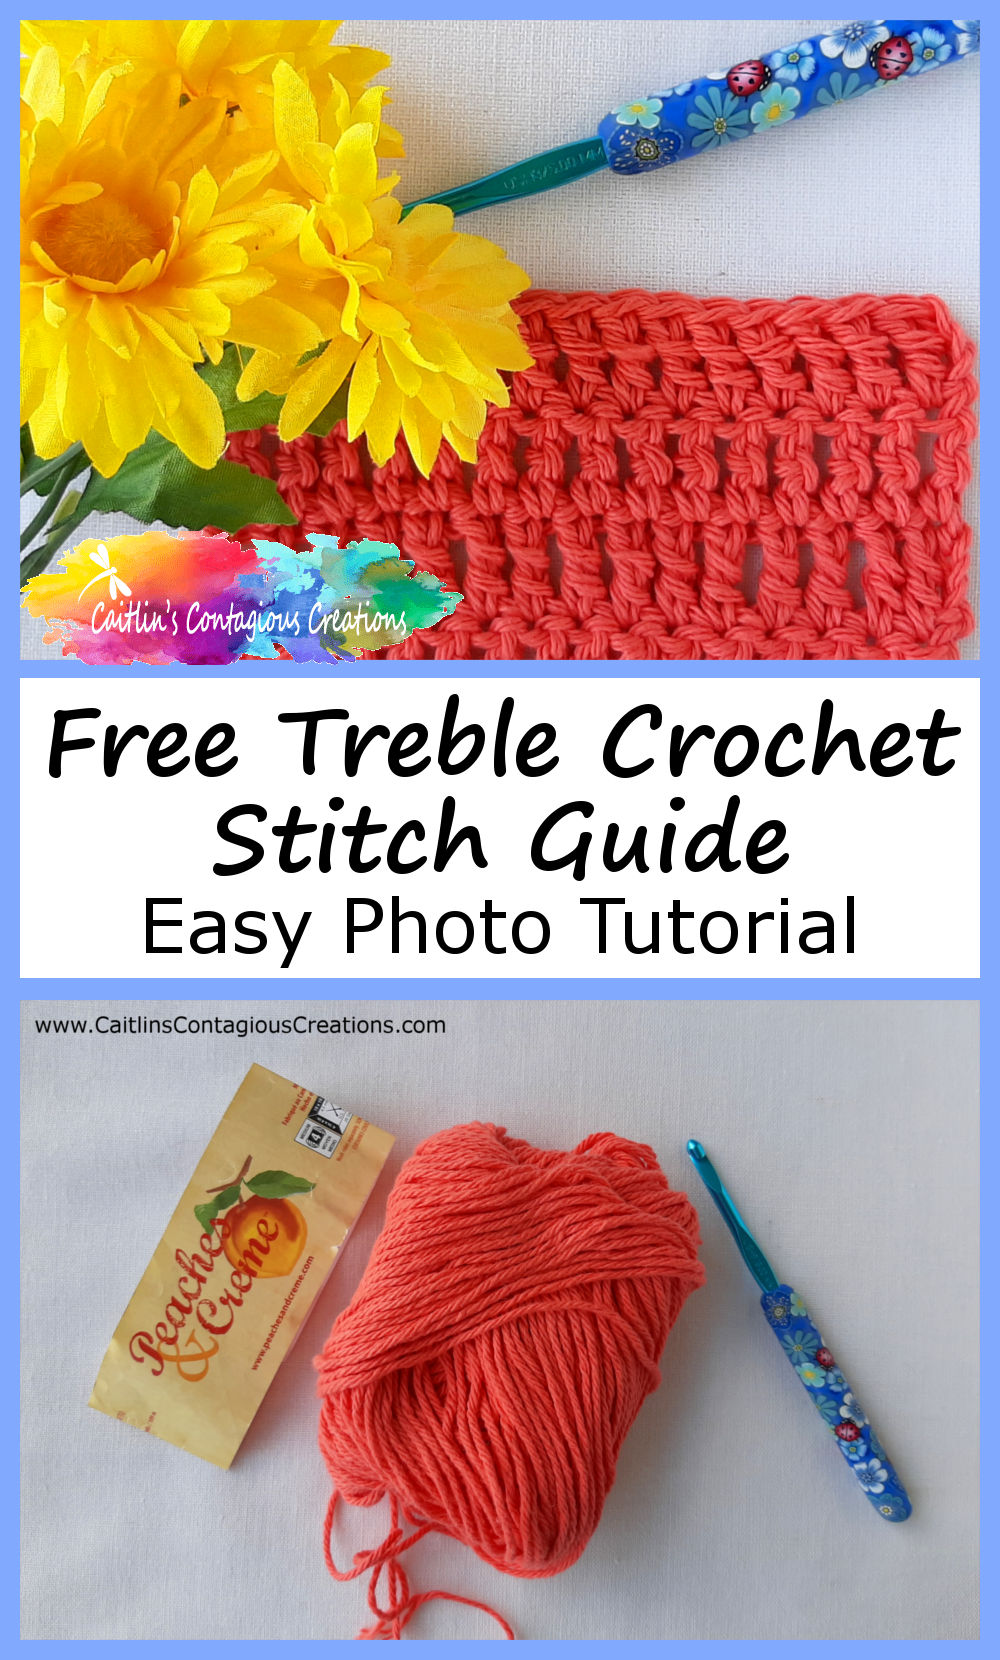 items needed and finished treble crochet stitch tutorial practice swatch with text overlay